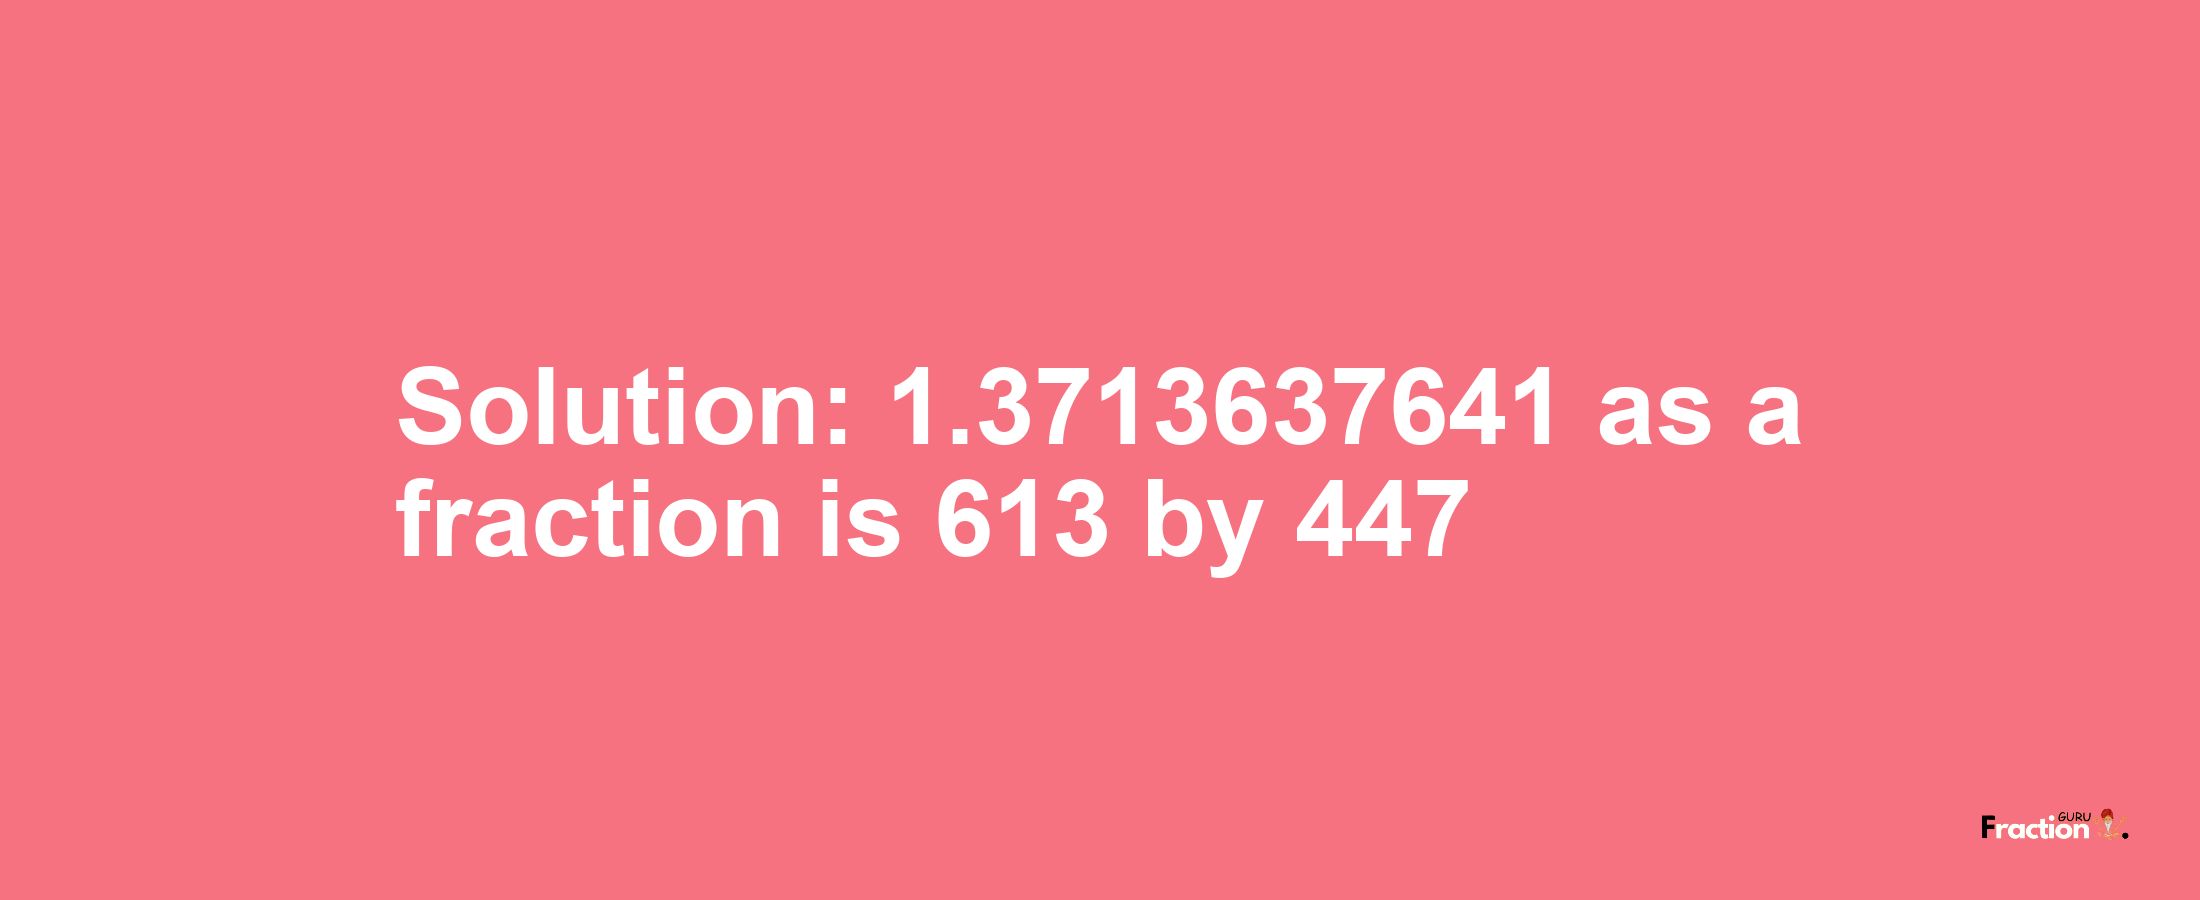 Solution:1.3713637641 as a fraction is 613/447